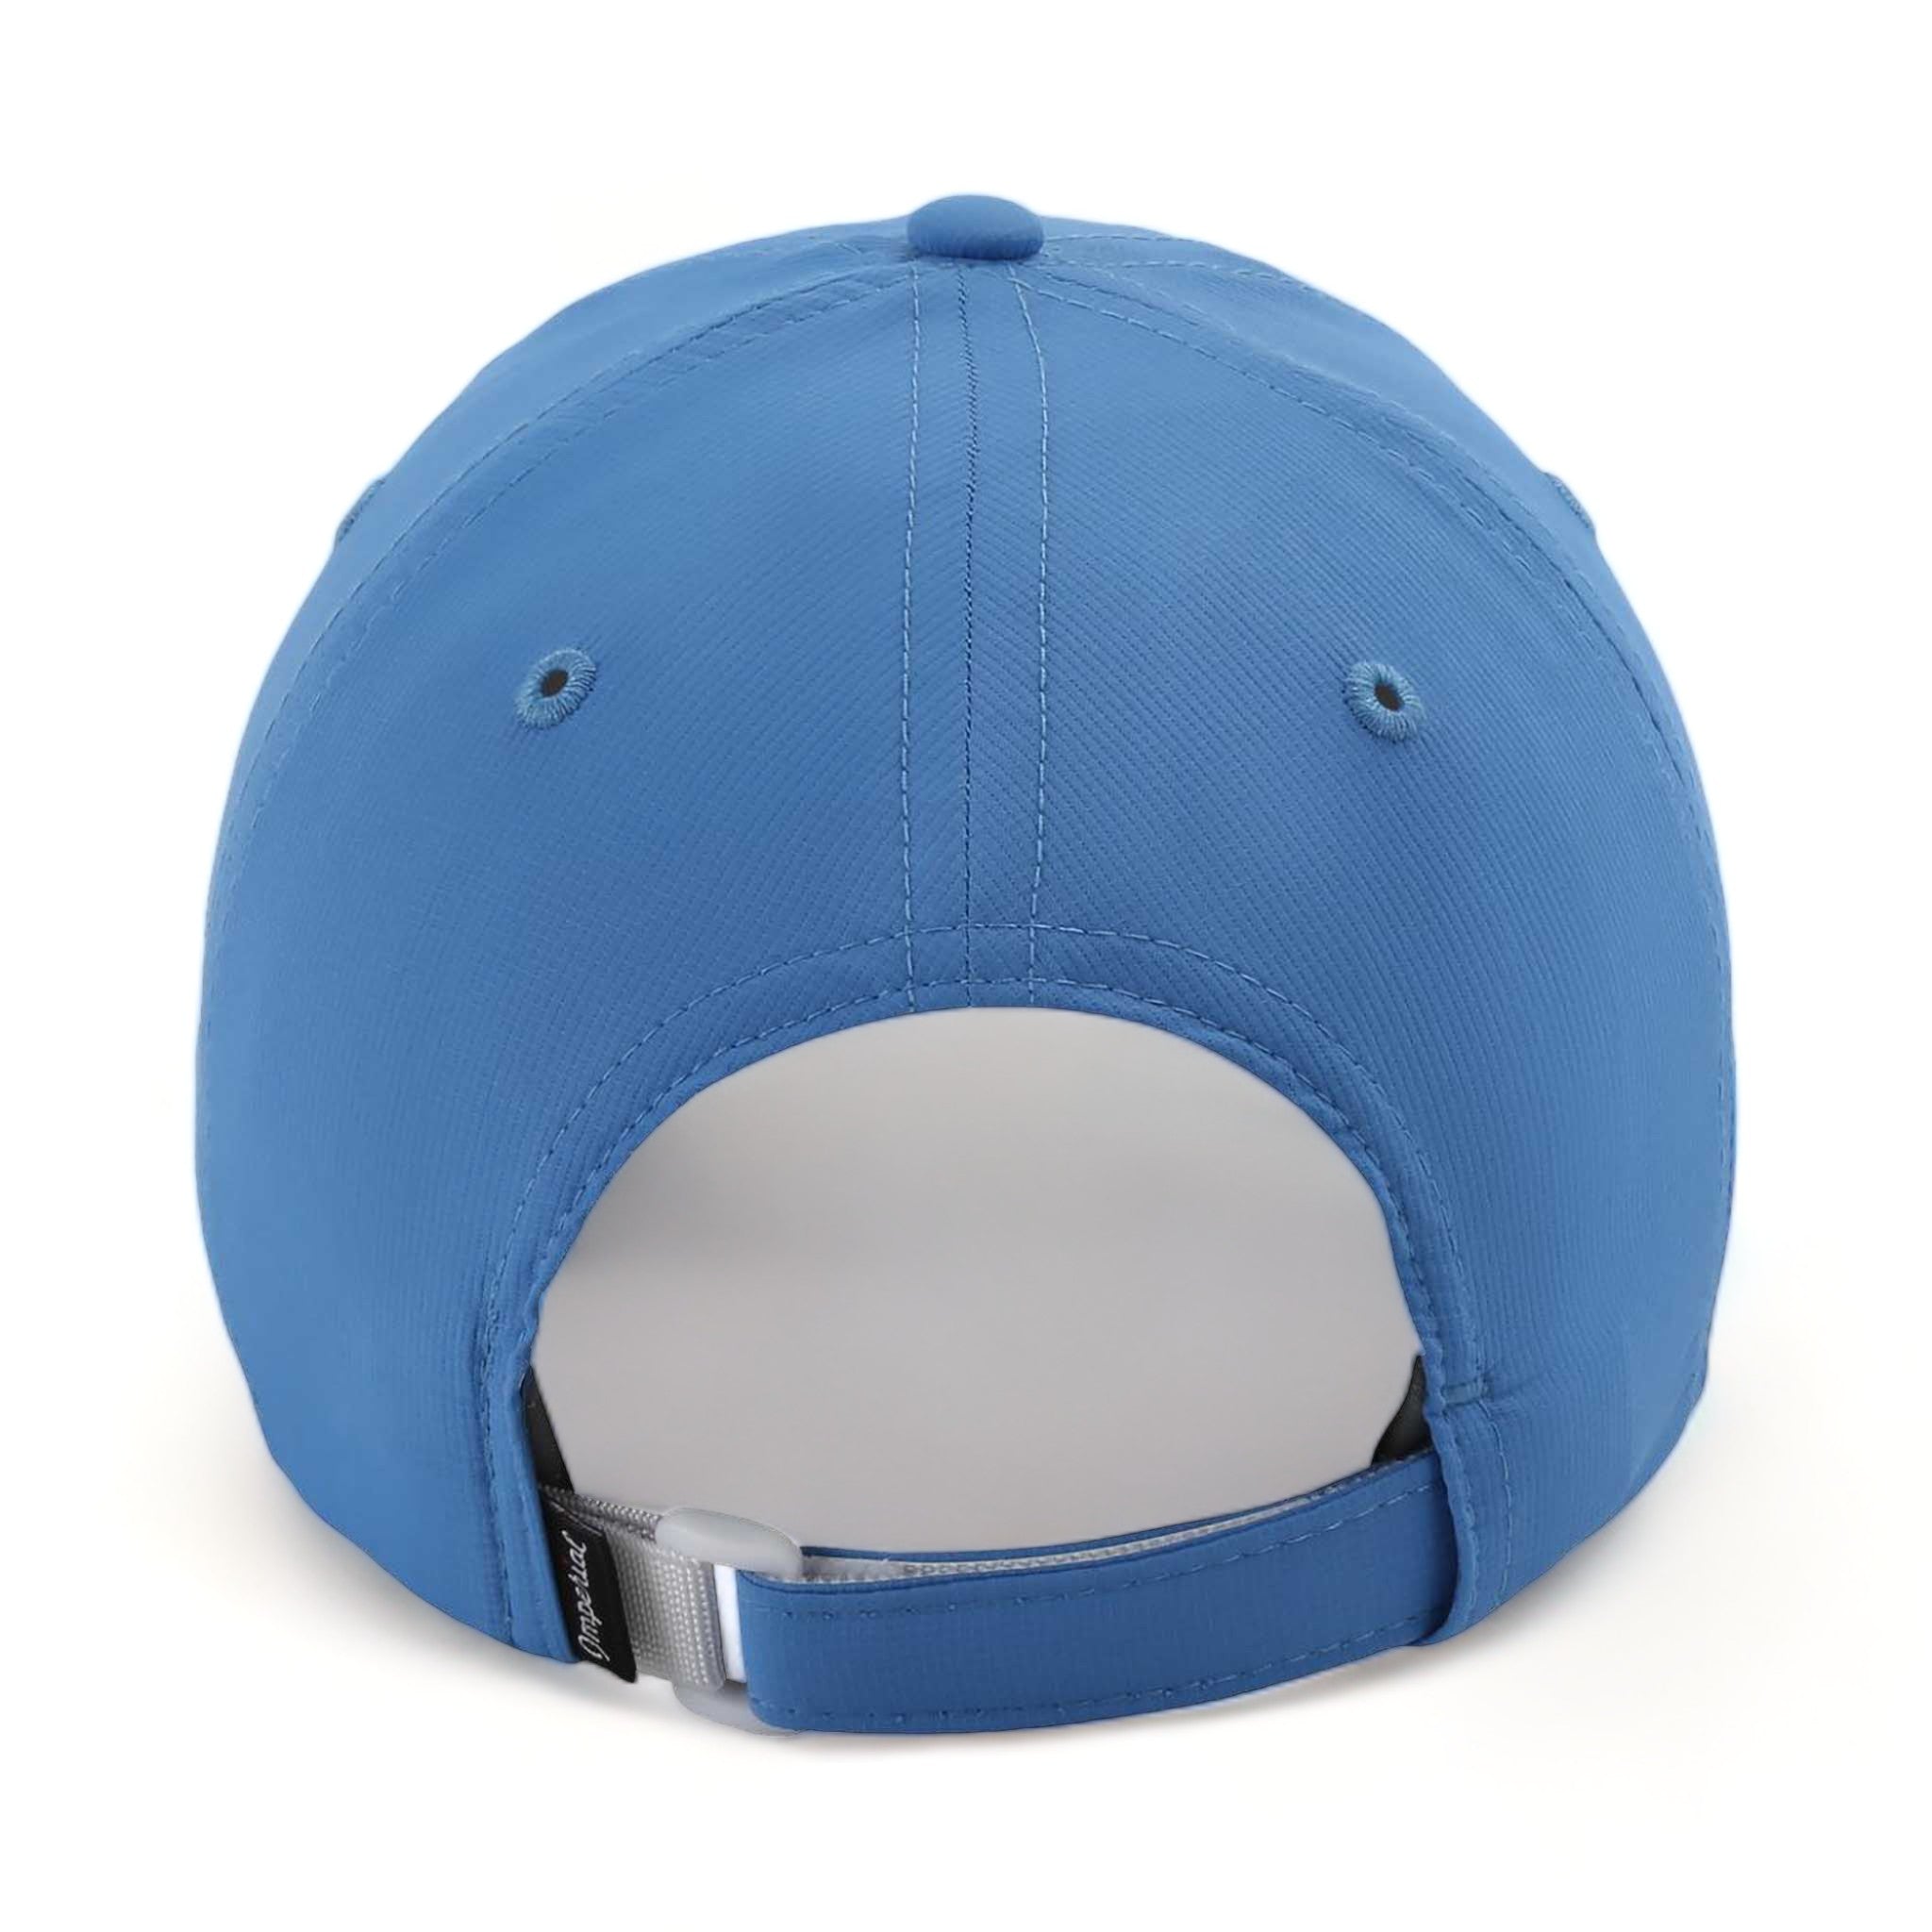 Back view of Imperial X210P custom hat in azure